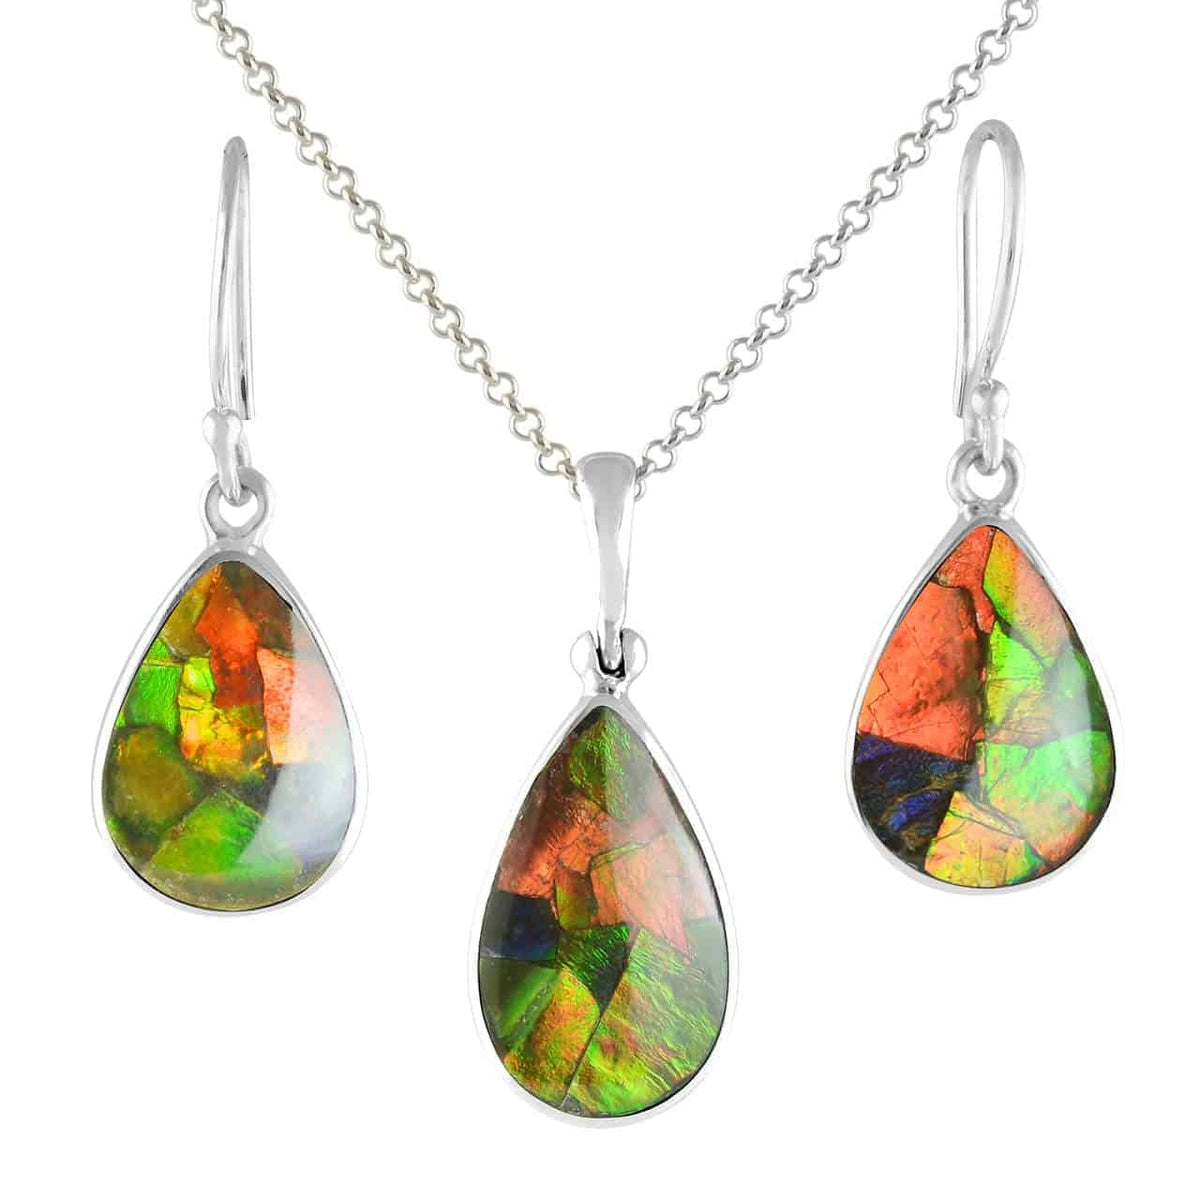 Starborn Ammolite Sterling Silver Pendant and Earring Set -